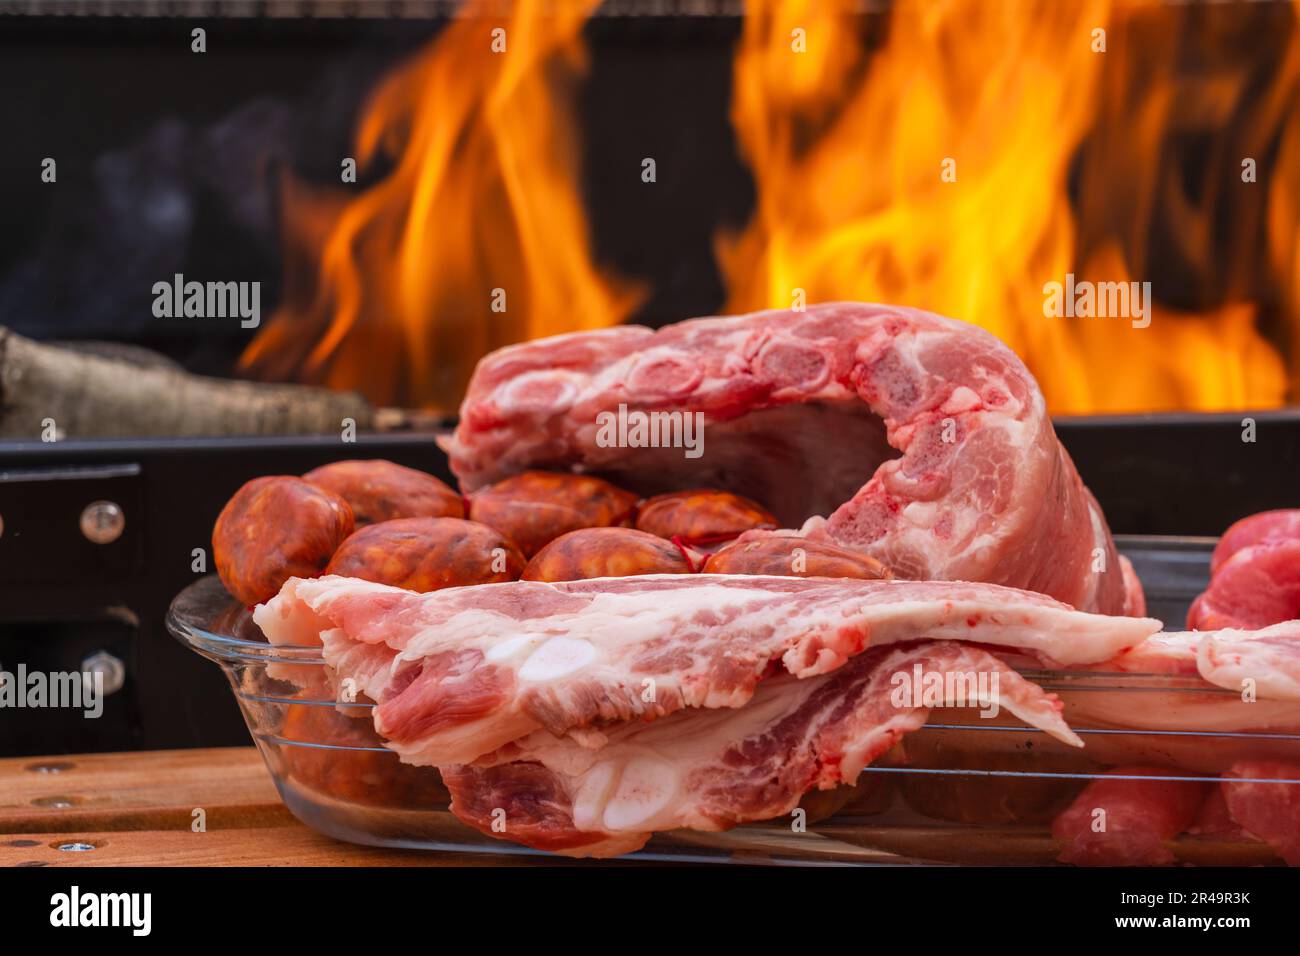 An array of raw meats and sausage near a burning grill with flames Stock Photo